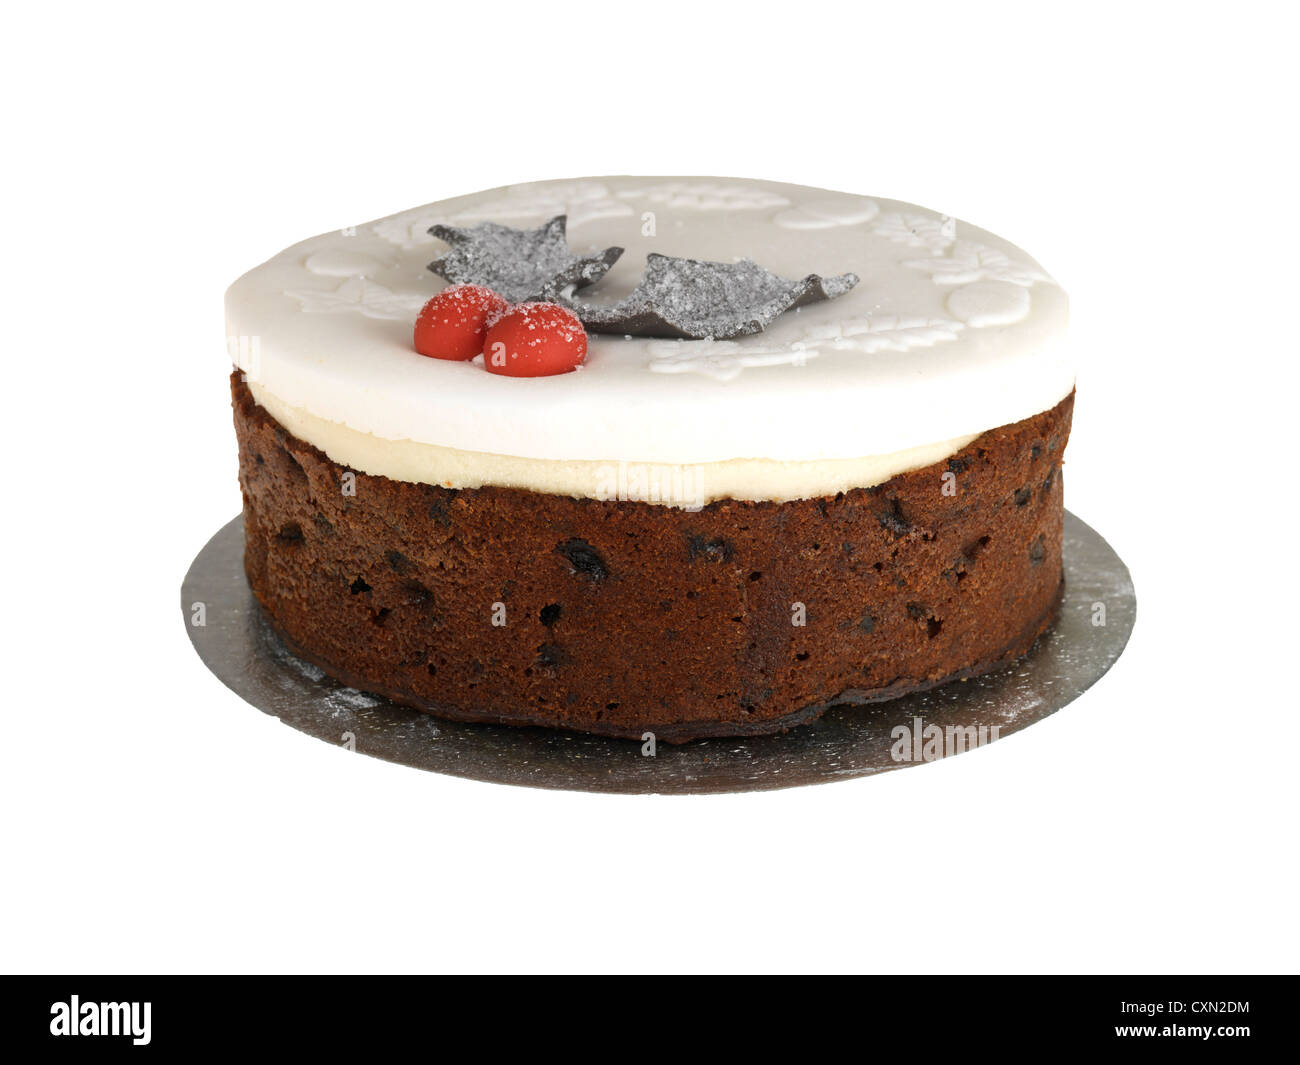 Traditional Festive Season Christmas Cake With White Icing Holly And Berries Decoration Against A White Background With No People Stock Photo